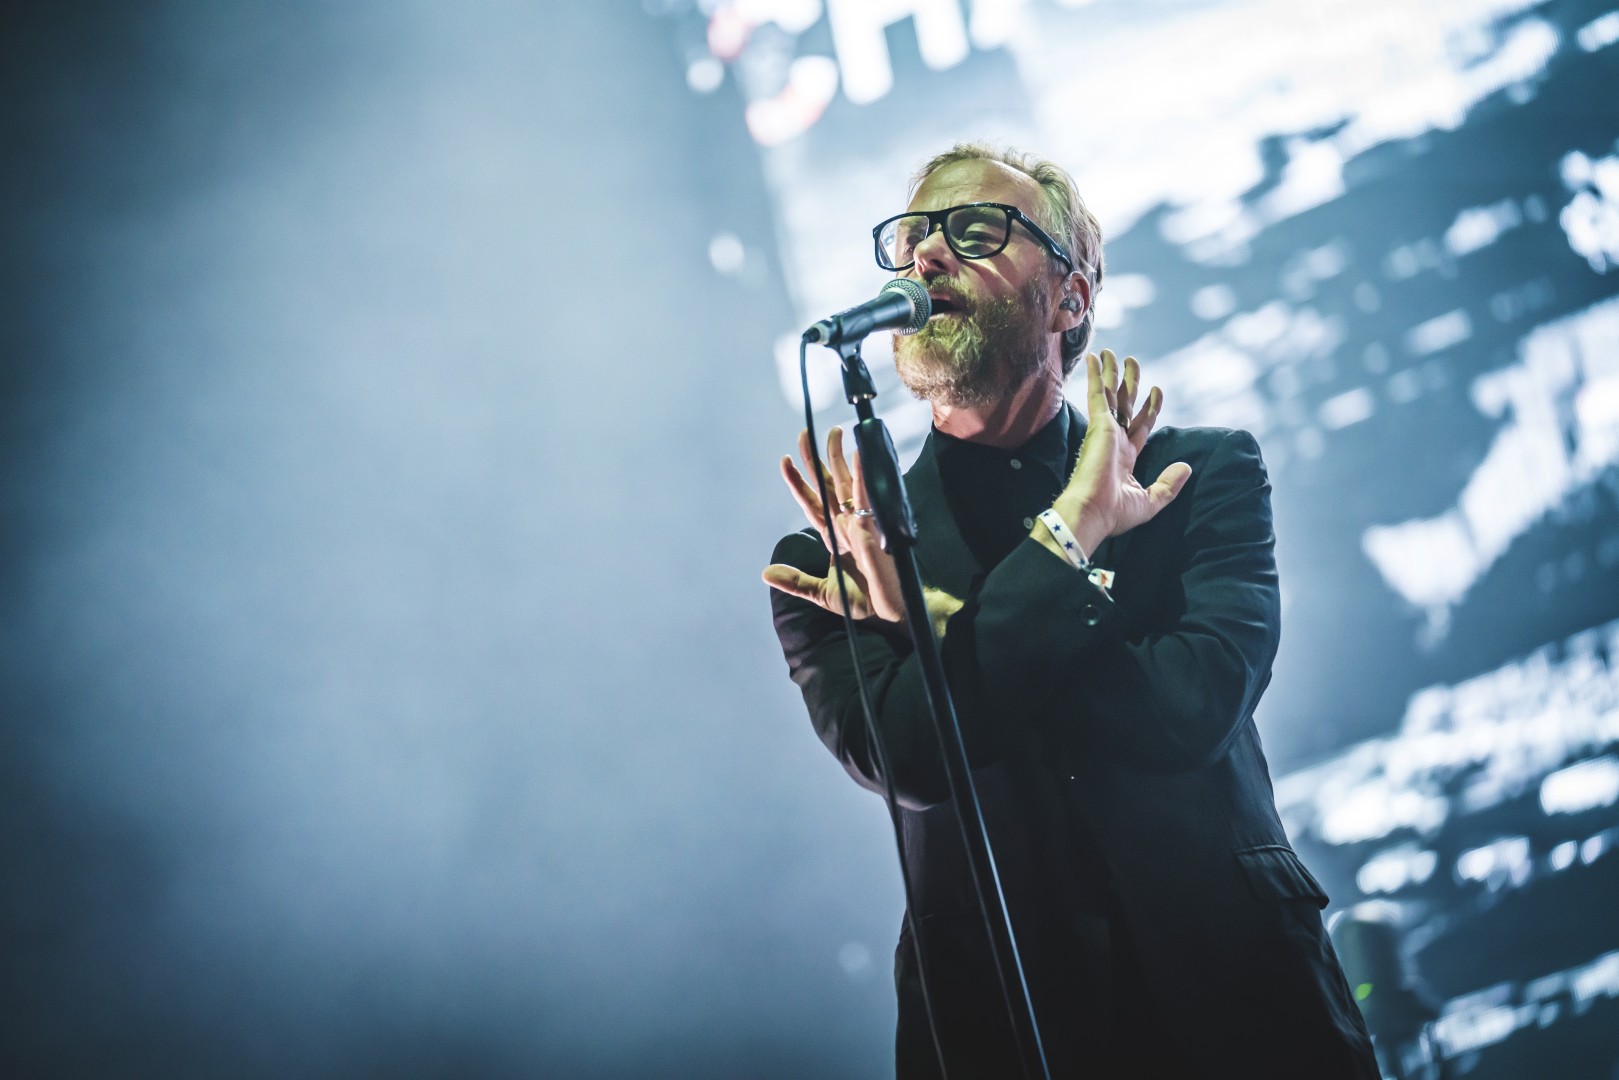 The National in Buftea on August 11, 2019 (e84957b68a)